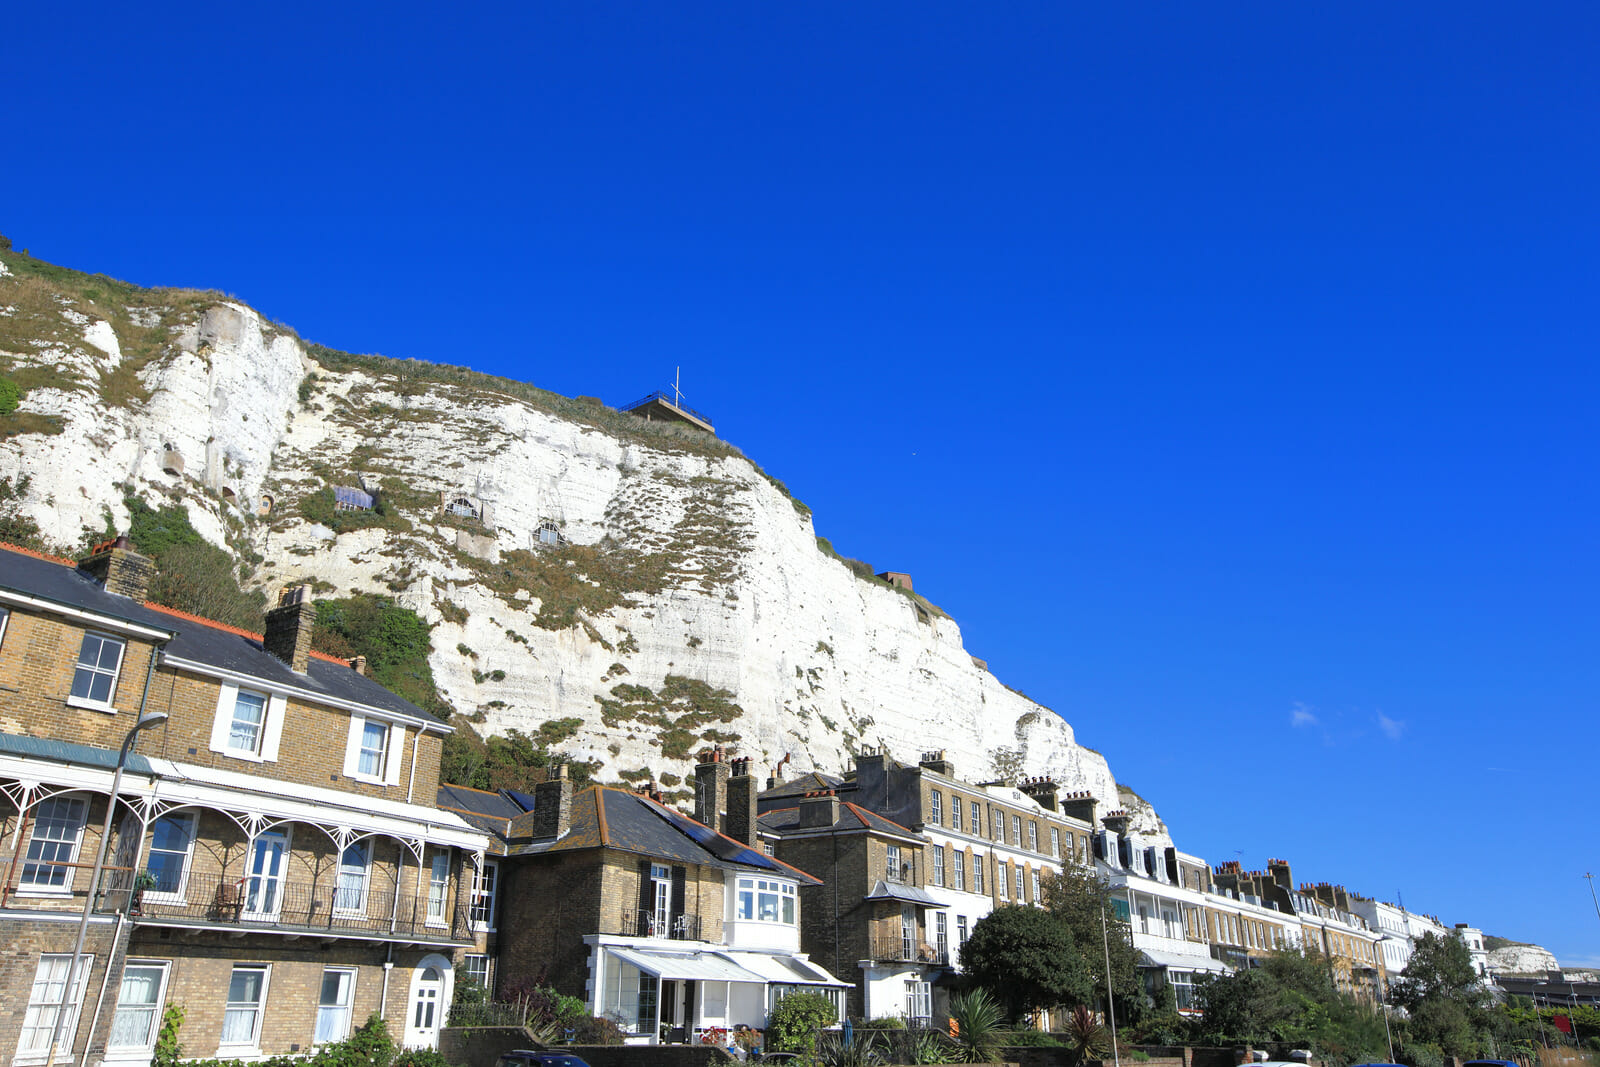 Best Things to Do in Dover - Europe Up Close